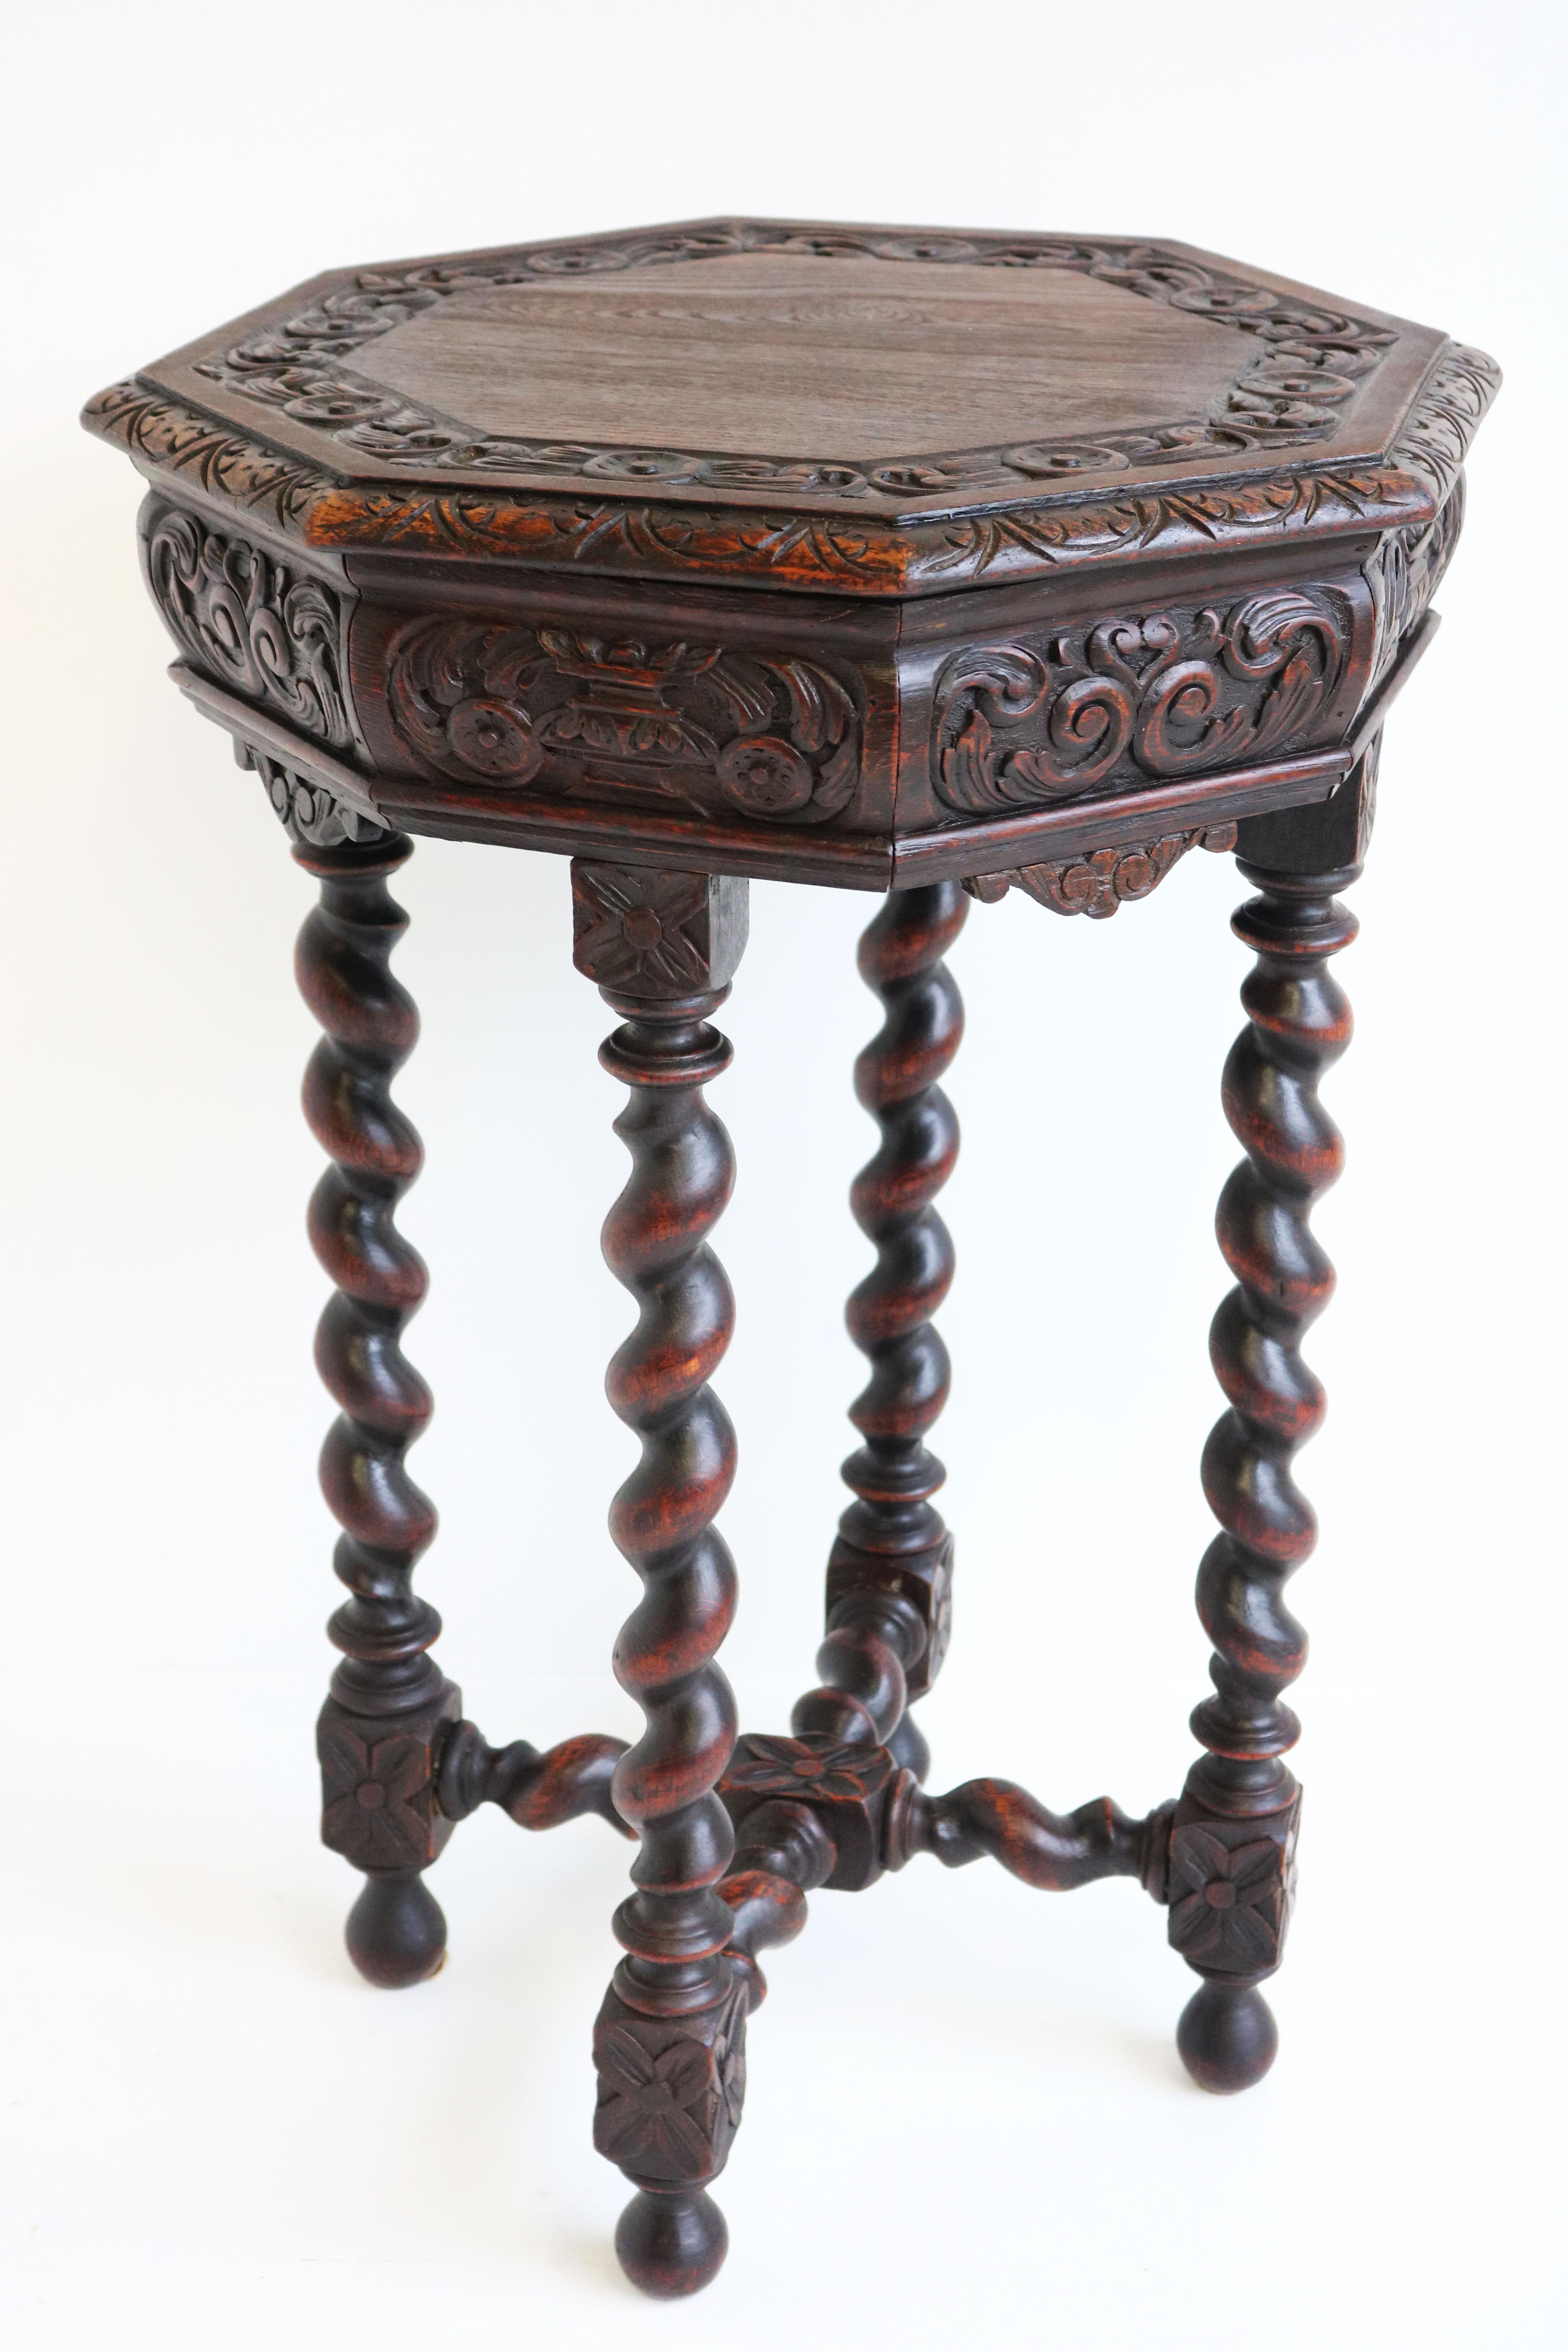 Lovely petite octagonal 19th century French antique side / end table renaissance revival style. 
Richly decorated with many hand carved symmetrical renaissance style decorations. And fitted on barley twisted columns.
The entire piece is made out